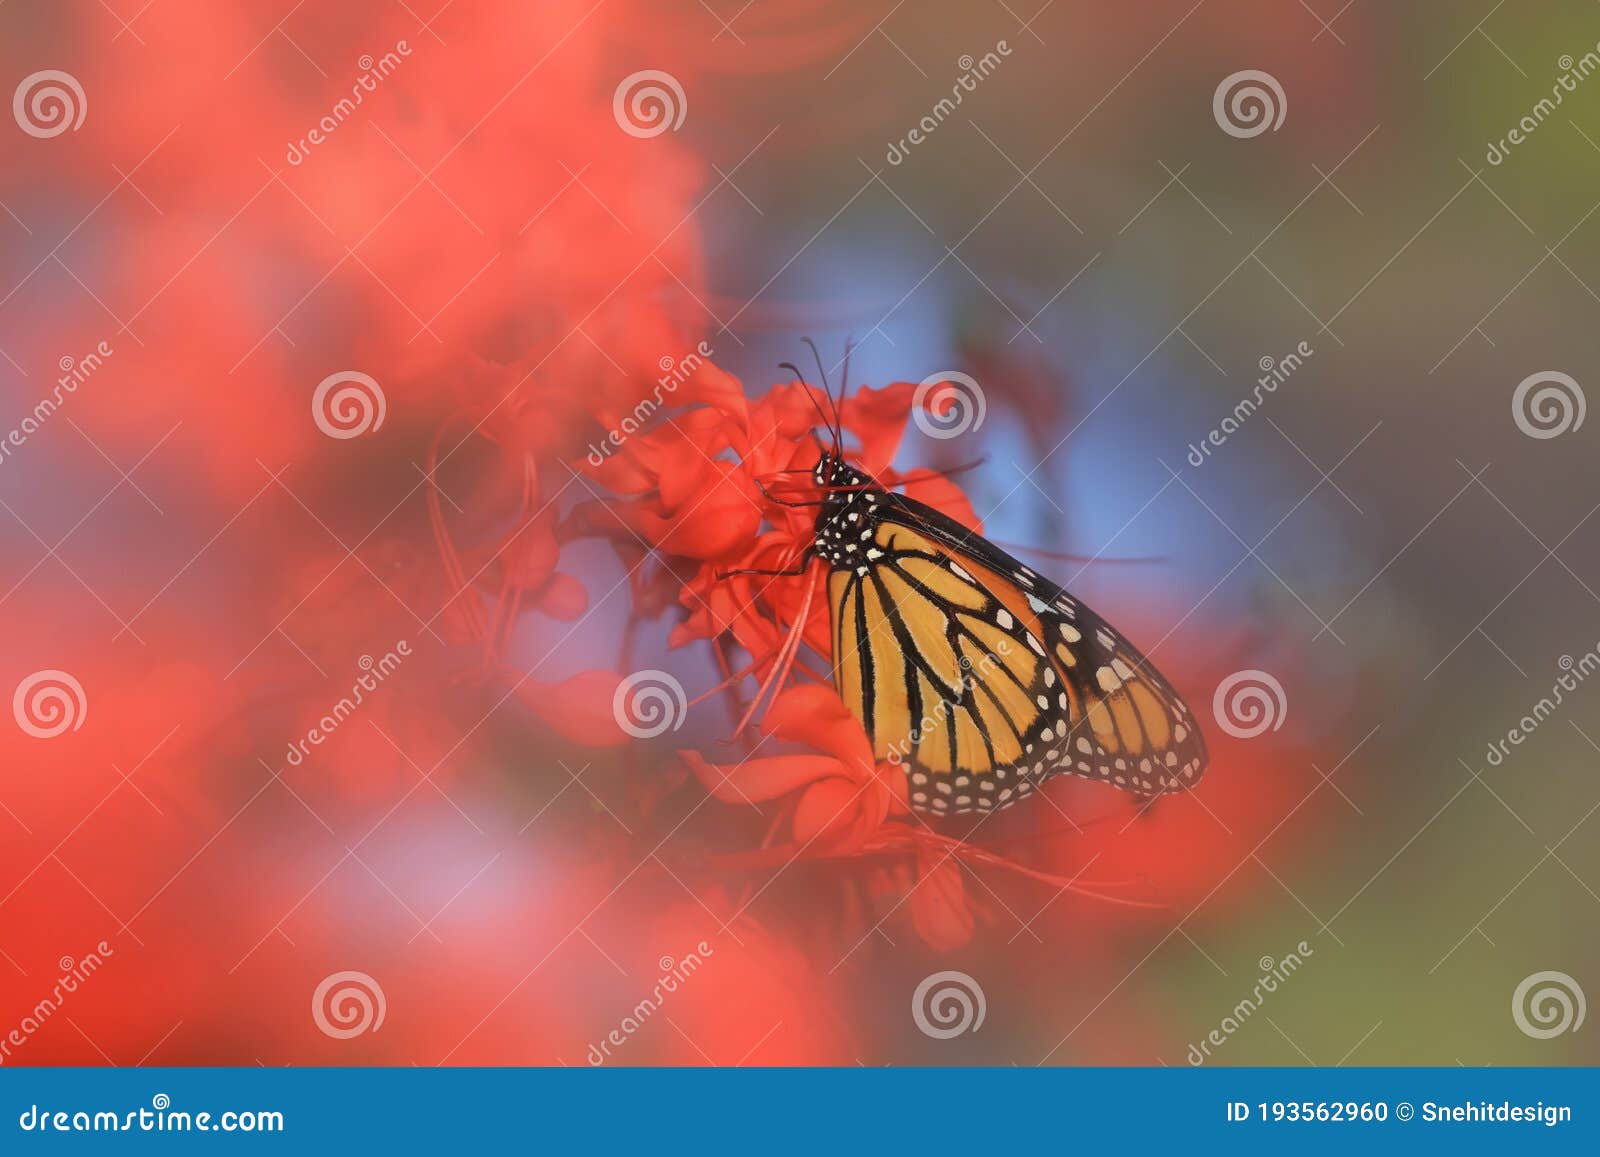 close up shot of monarch butterfly on red flowers